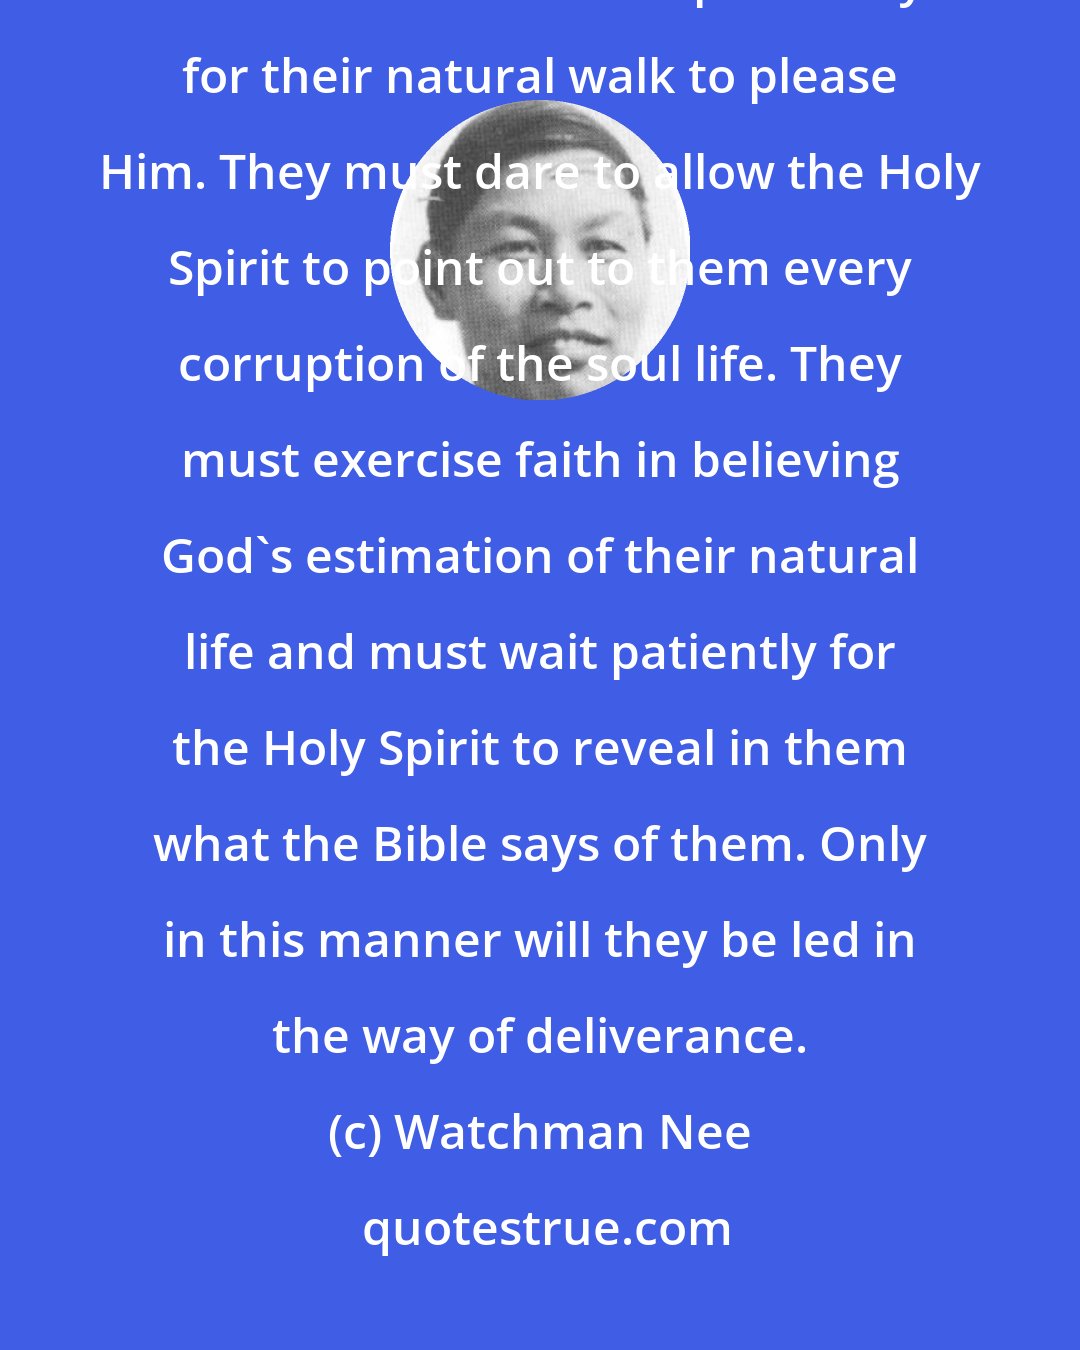 Watchman Nee: Christians ought to eliminate their folly. They ought to adopt God's view of the absolute impossibility for their natural walk to please Him. They must dare to allow the Holy Spirit to point out to them every corruption of the soul life. They must exercise faith in believing God's estimation of their natural life and must wait patiently for the Holy Spirit to reveal in them what the Bible says of them. Only in this manner will they be led in the way of deliverance.